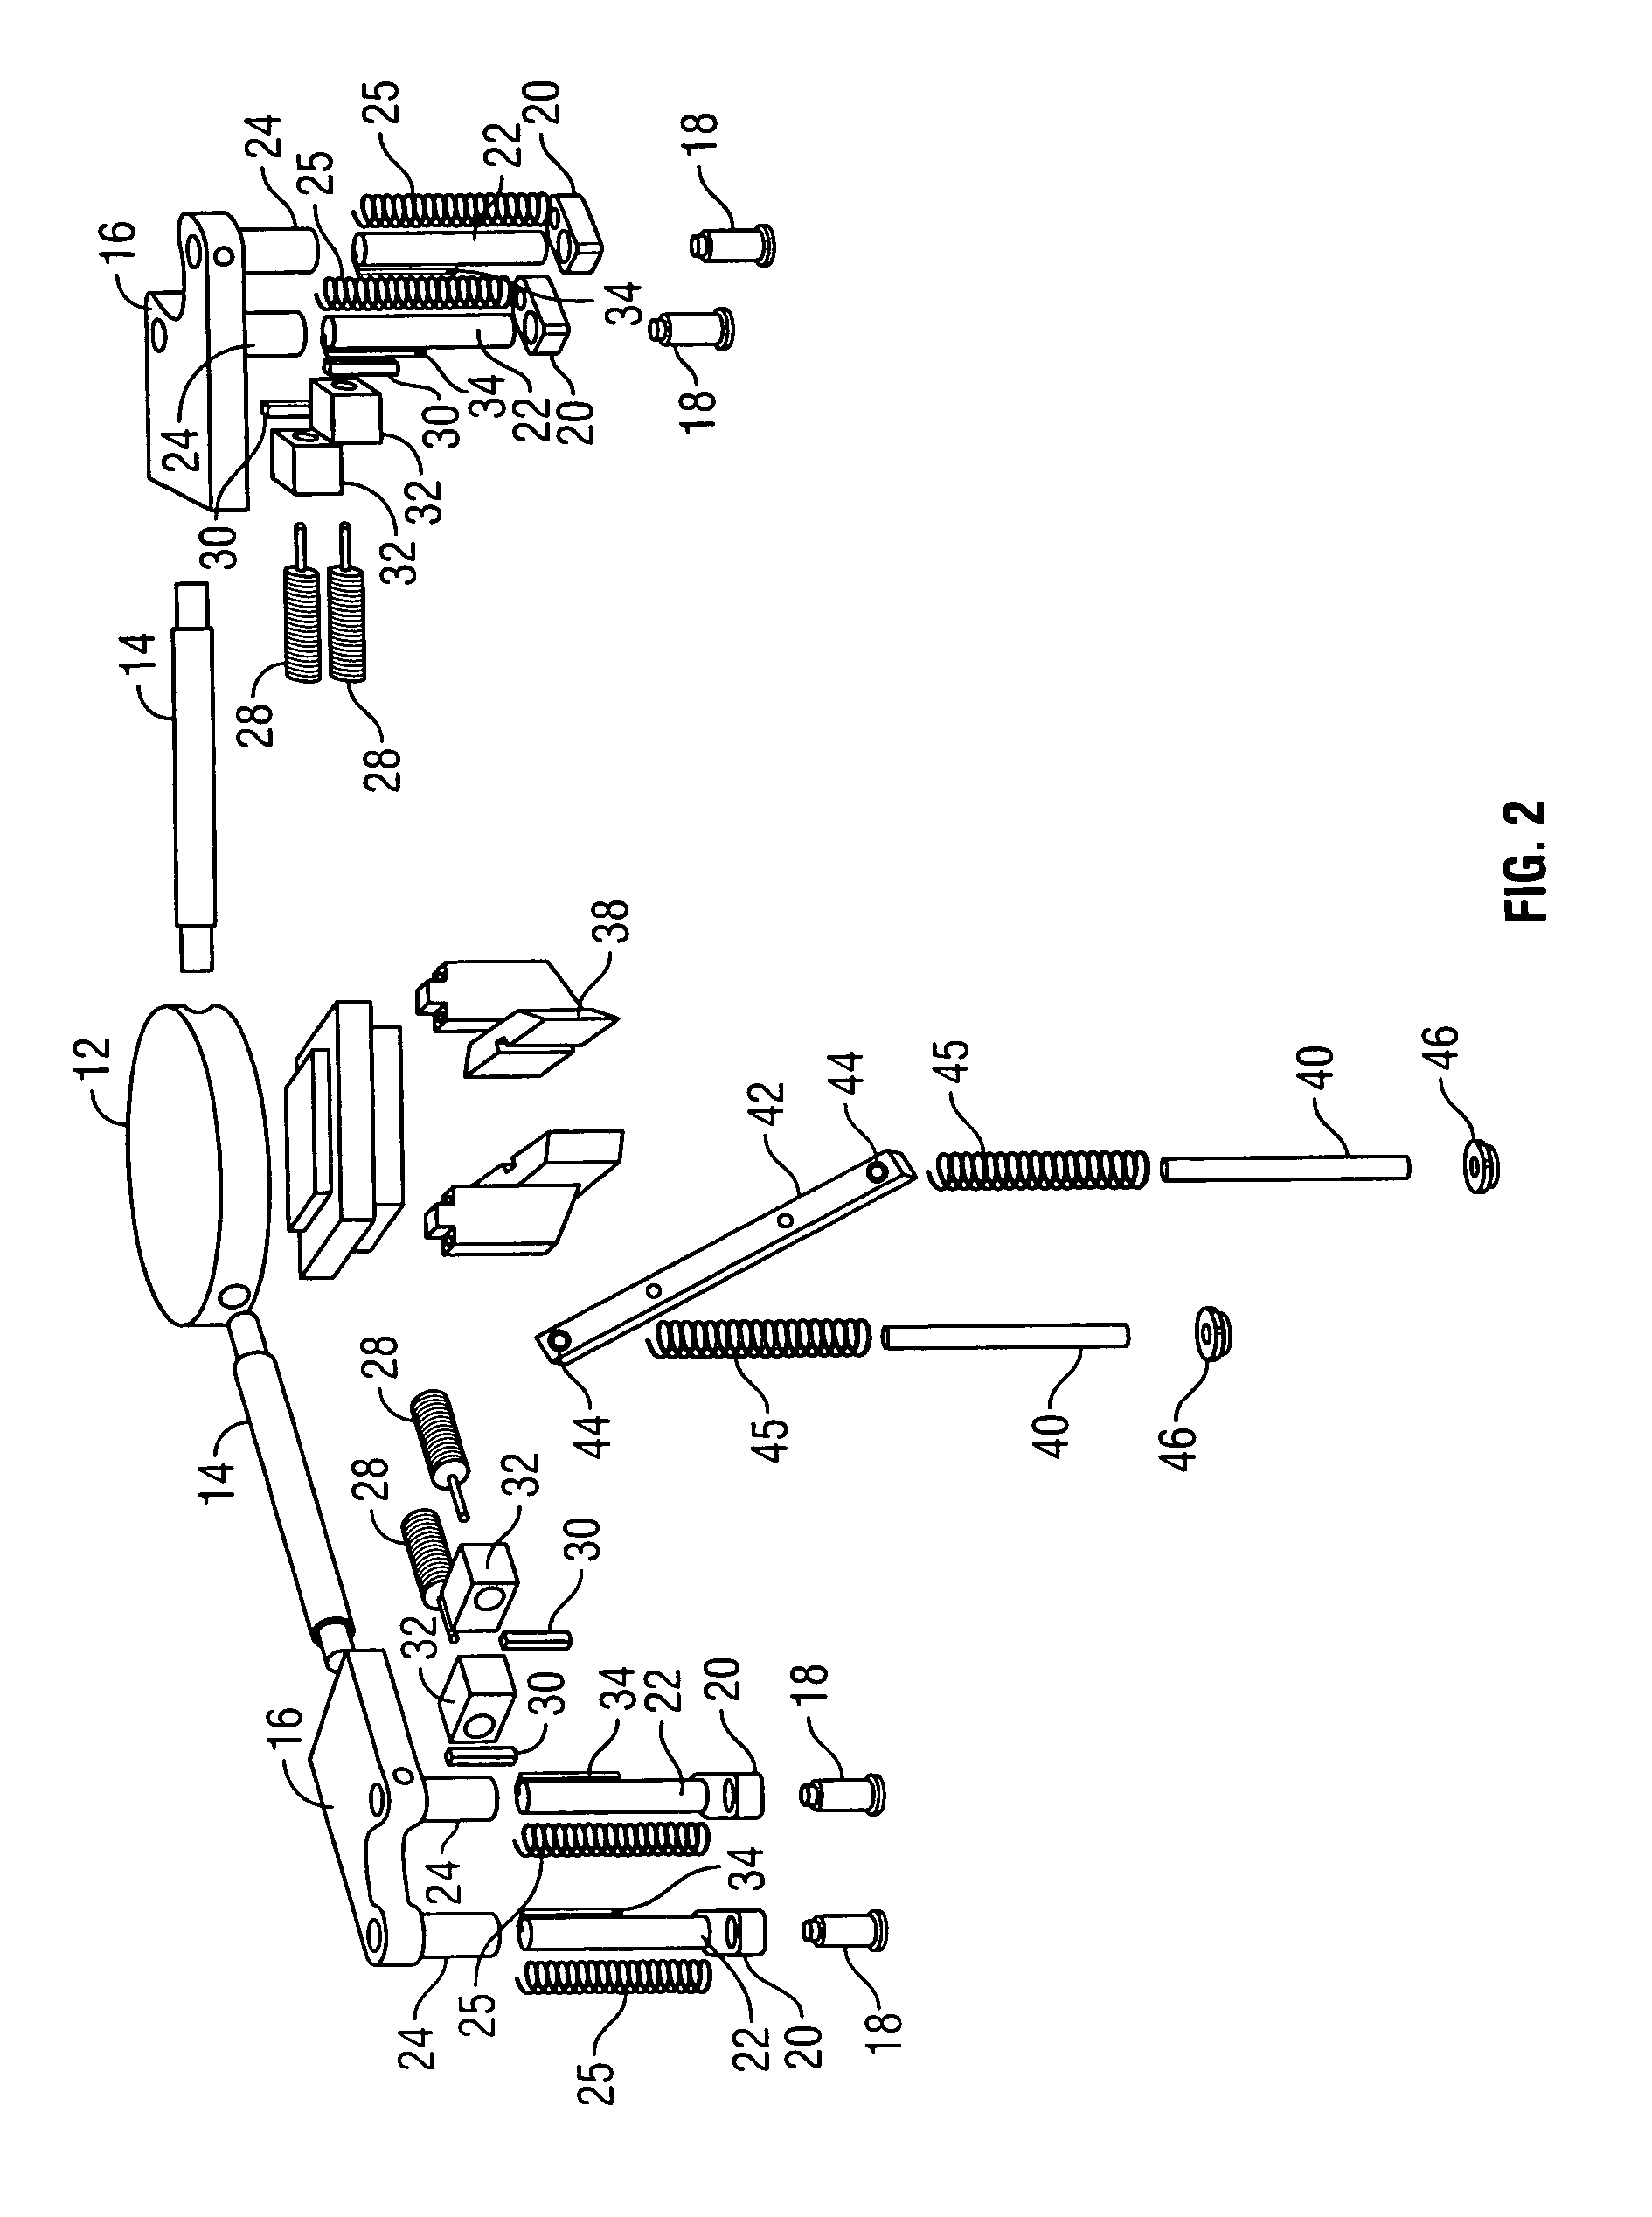 Ophthalmic lens manufacturing system